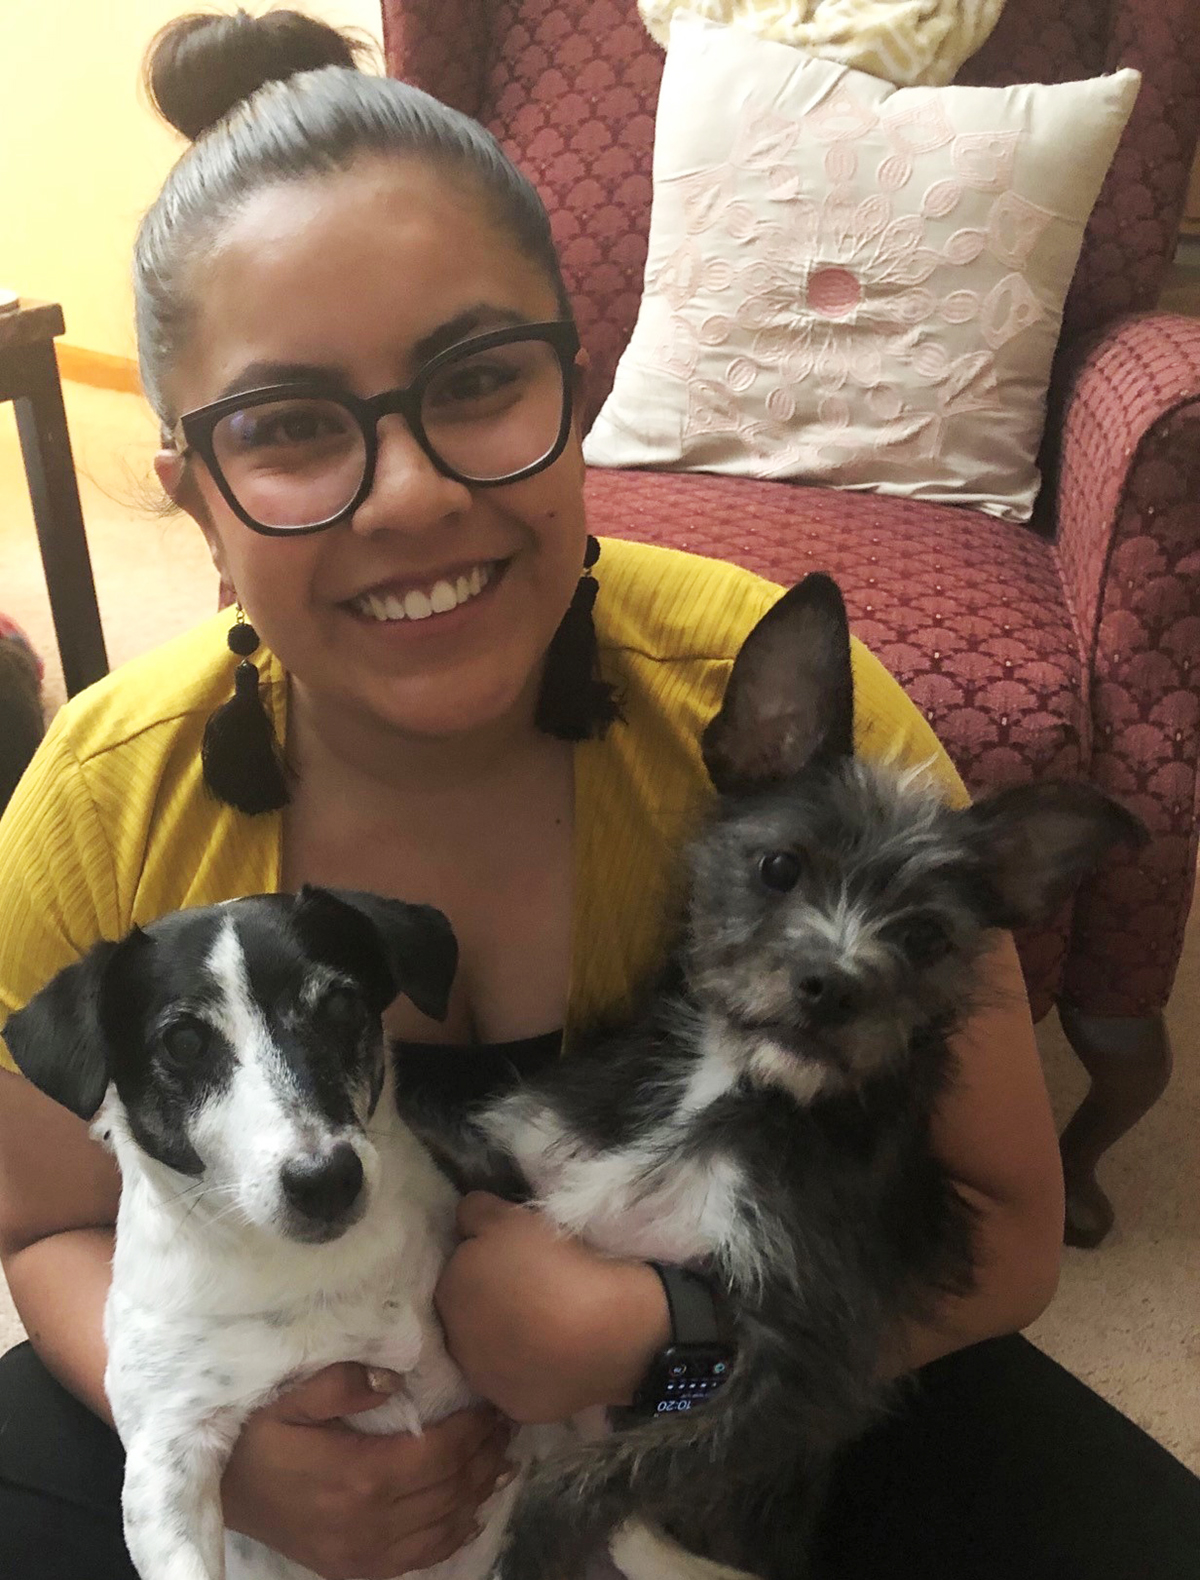 Marisol Gonzalez Castillo poses with her two dogs